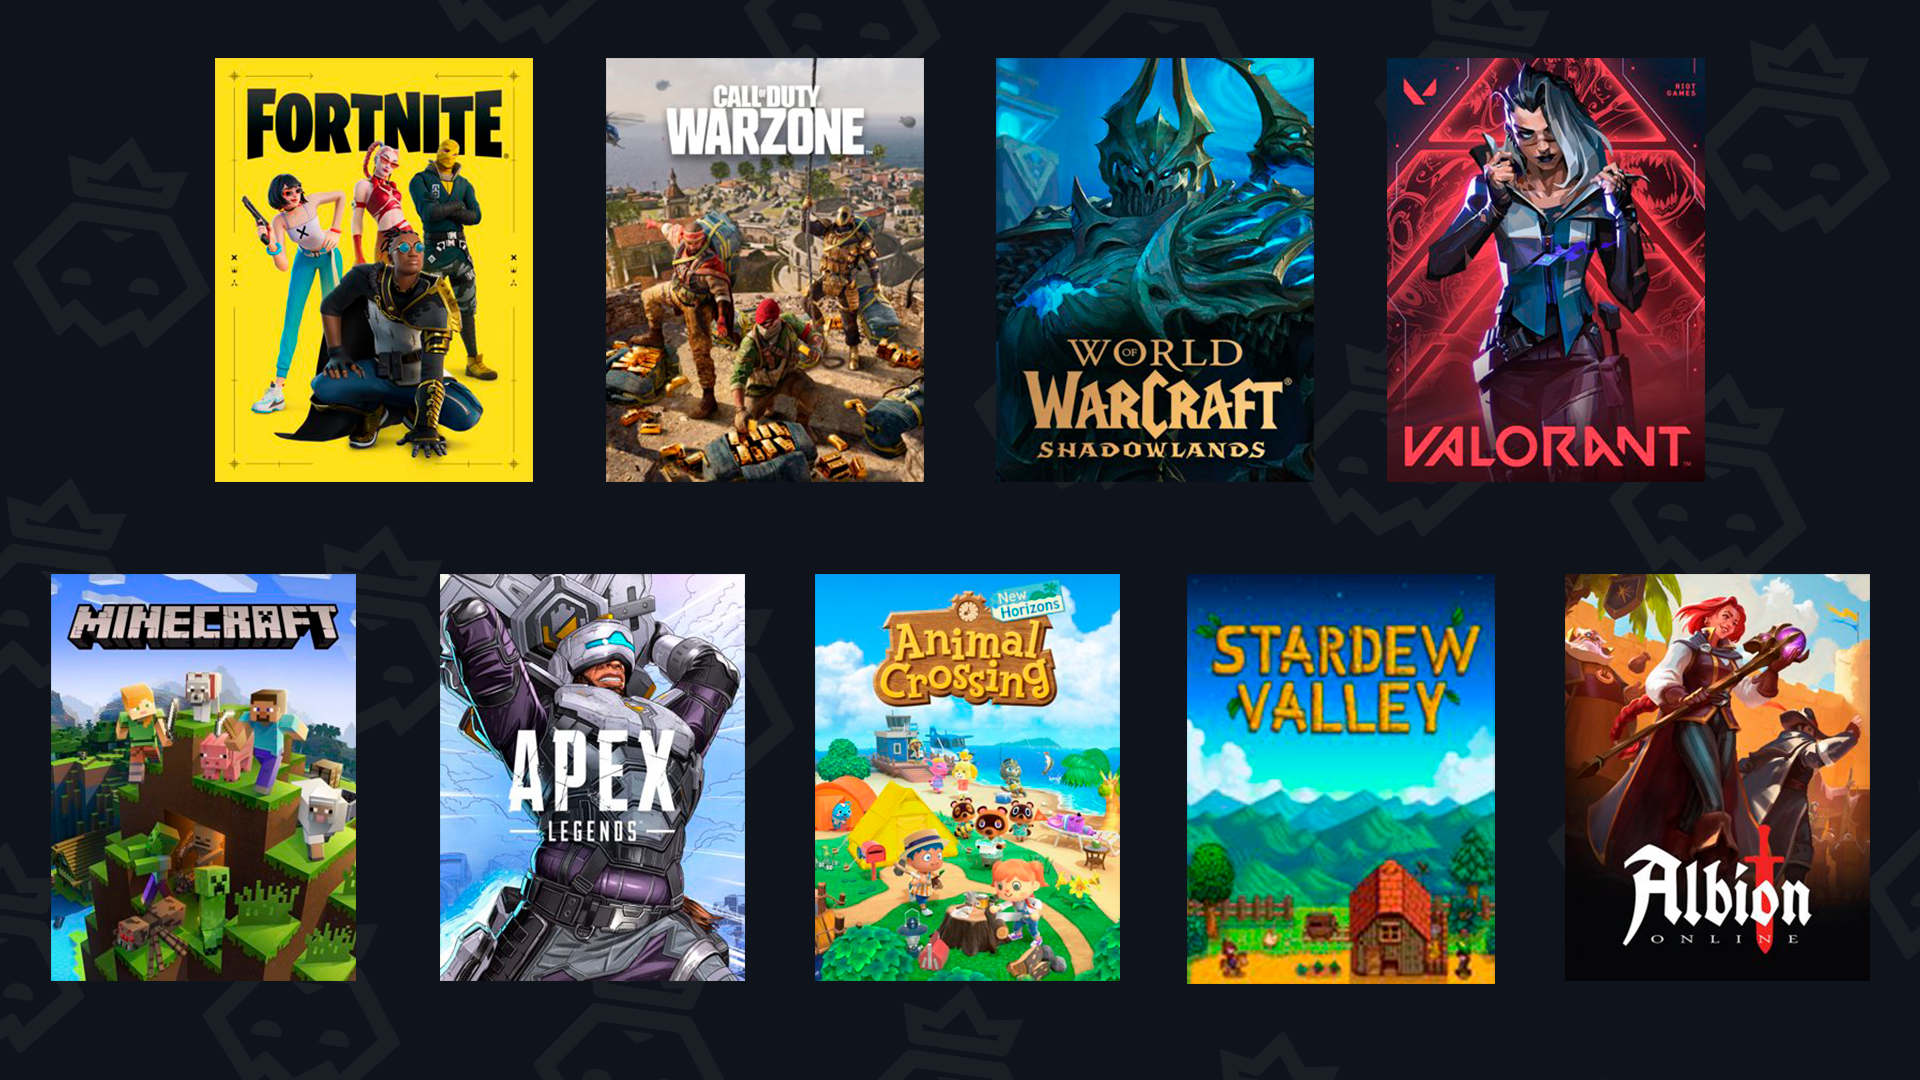 A new way to keep up with games you can buy on Twitch